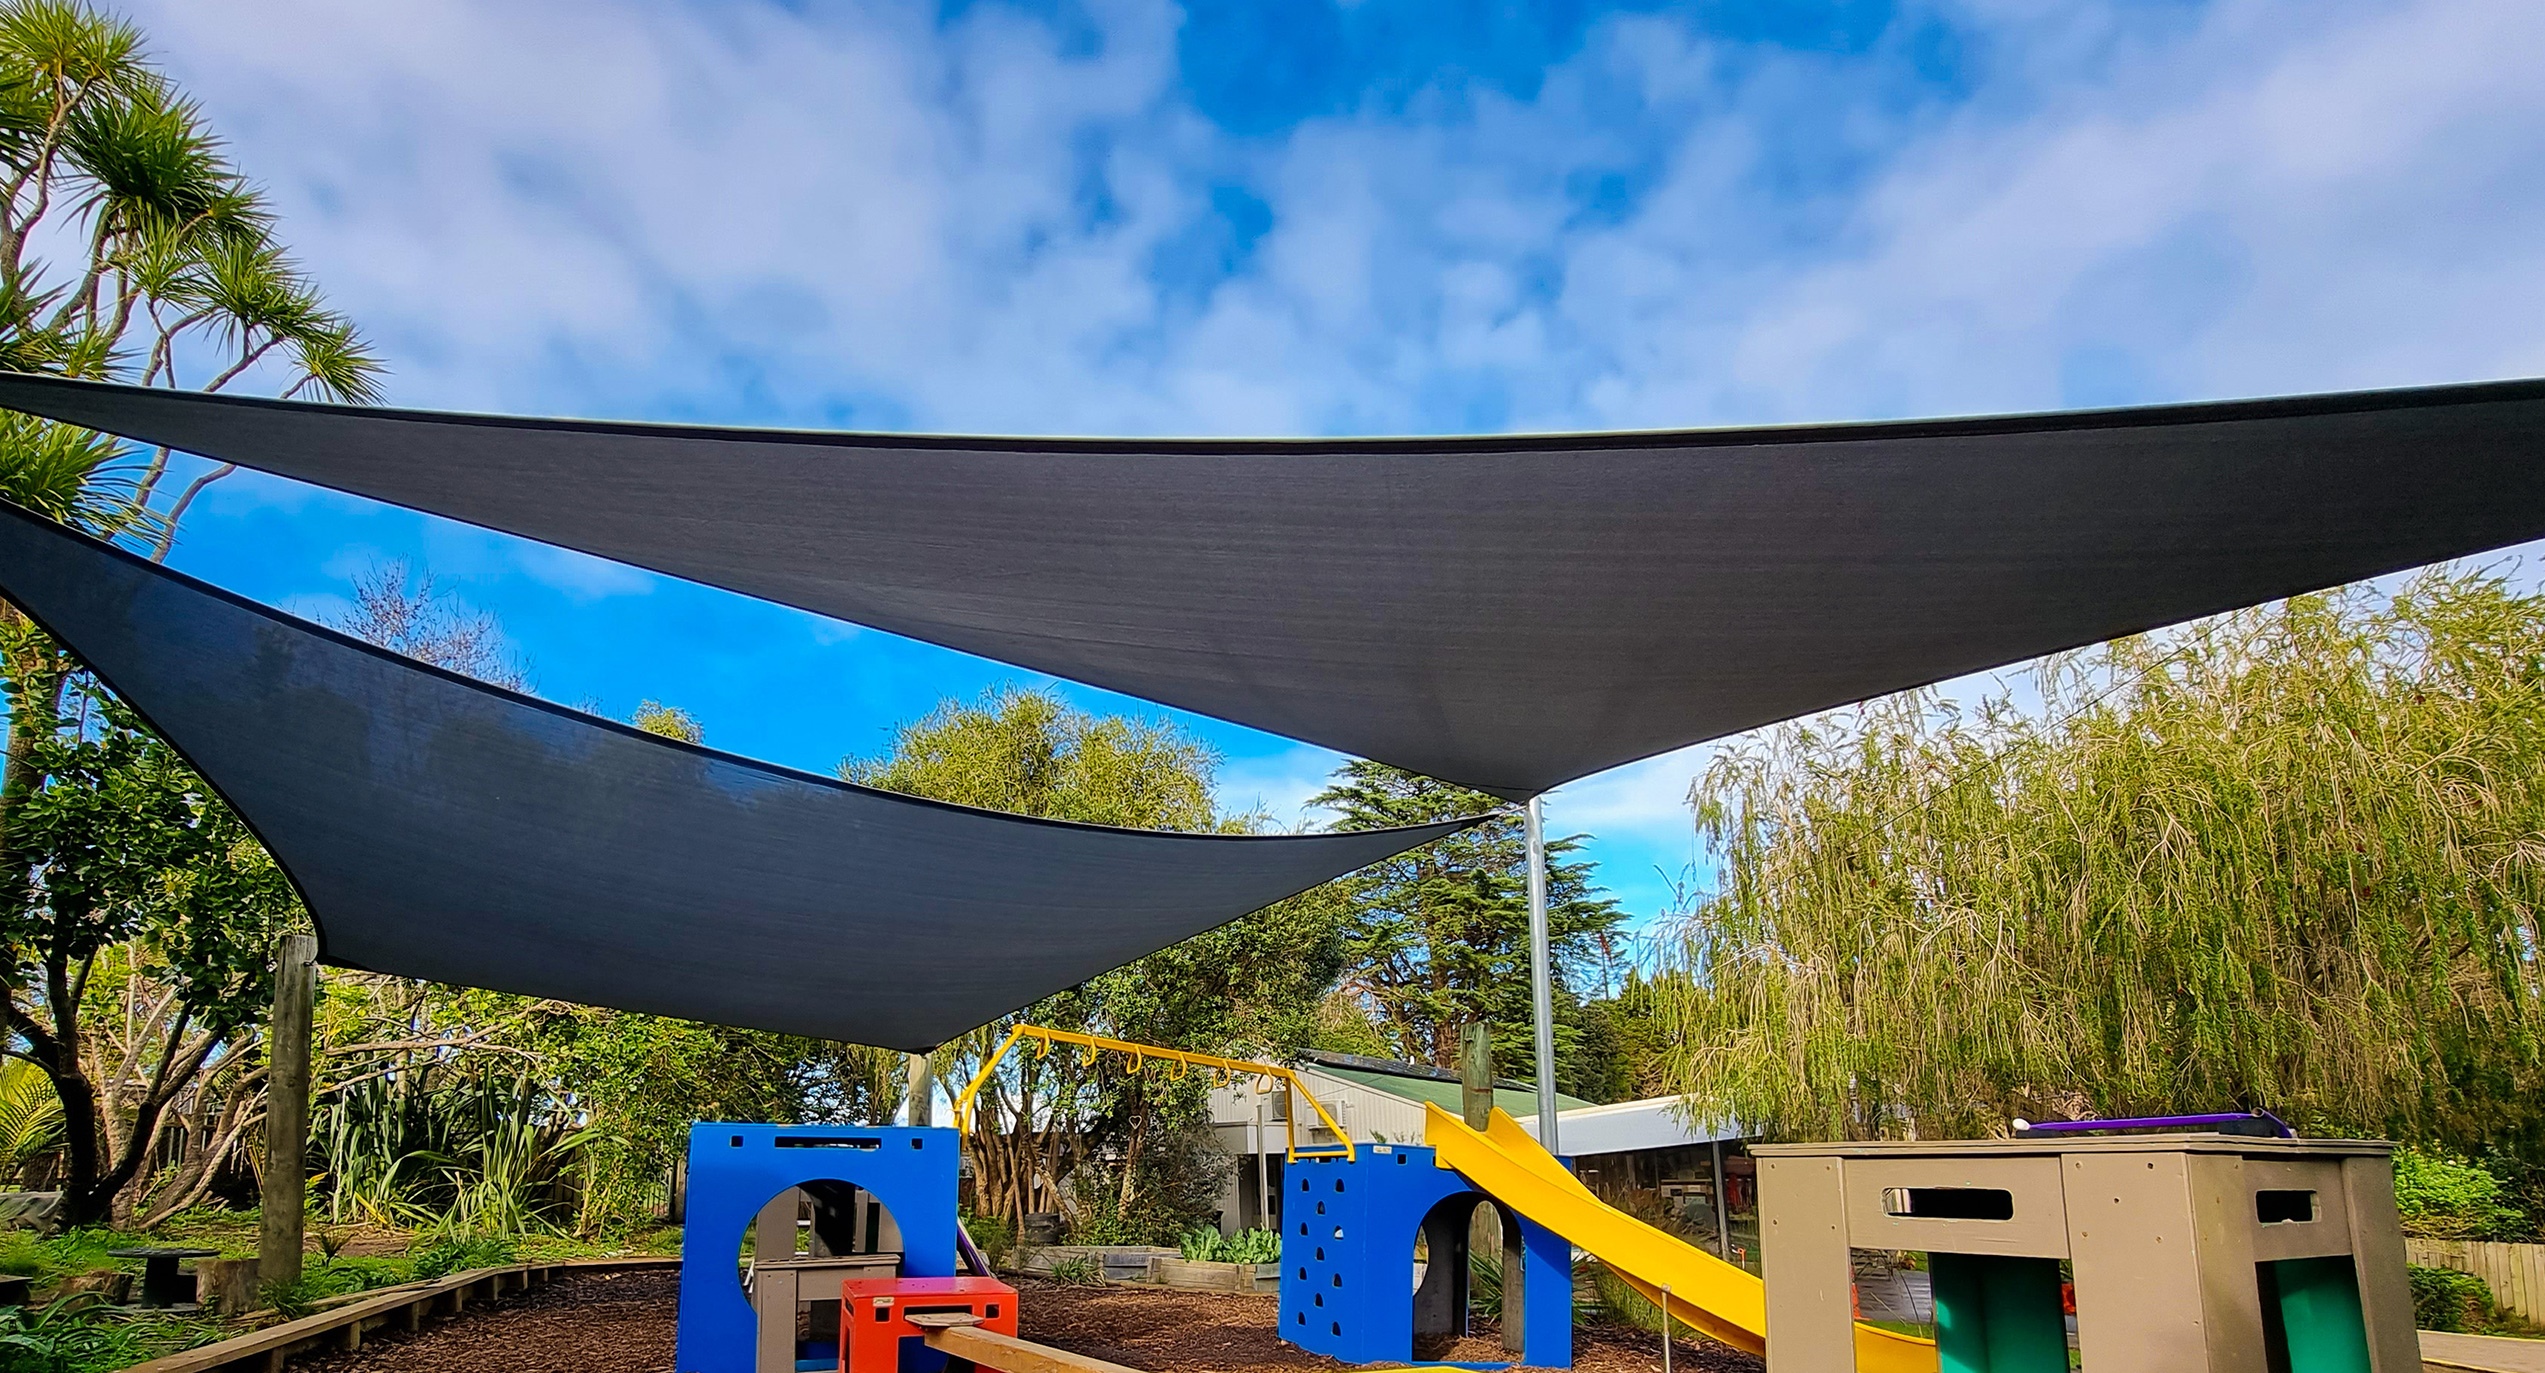 Shadeland creates shaded outdoor living spaces with custom designed and installed shade sails